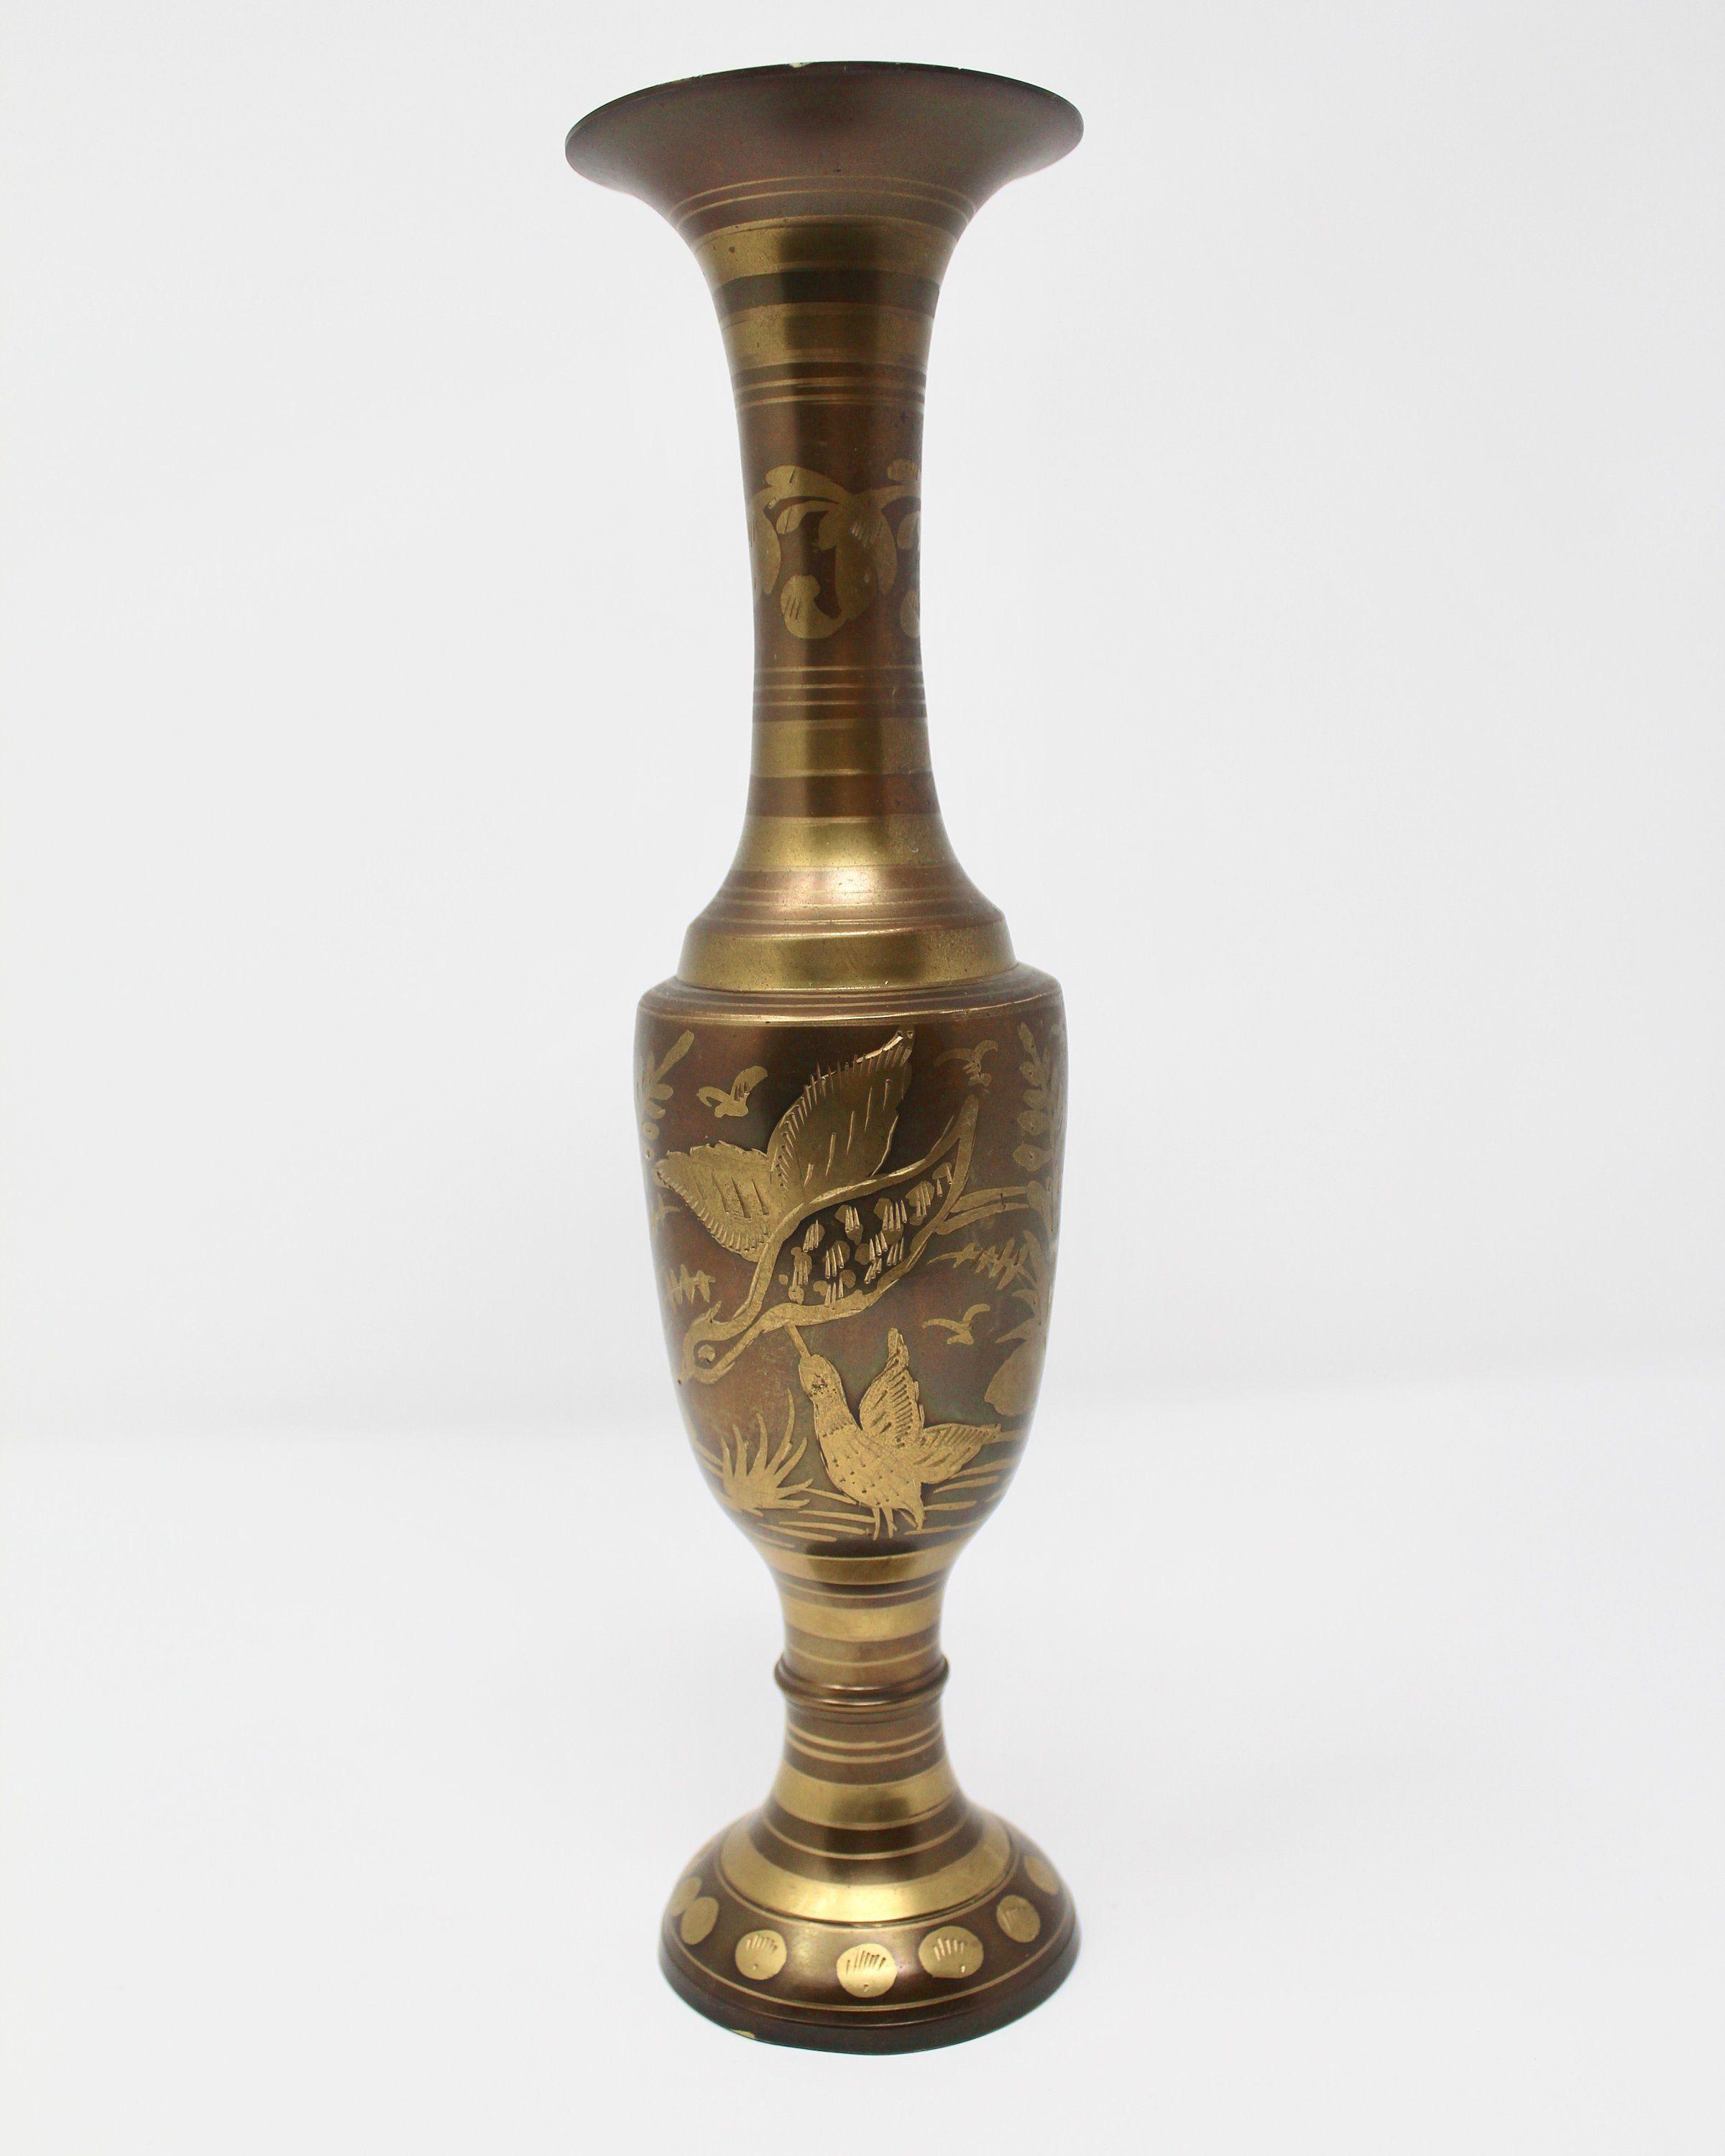 20 Cute Antique Brass Vase Made In India 2023 free download antique brass vase made in india of solid brass etched vintage vase crafted in india vintage vases intended for solid brass etched vintage vase crafted in india